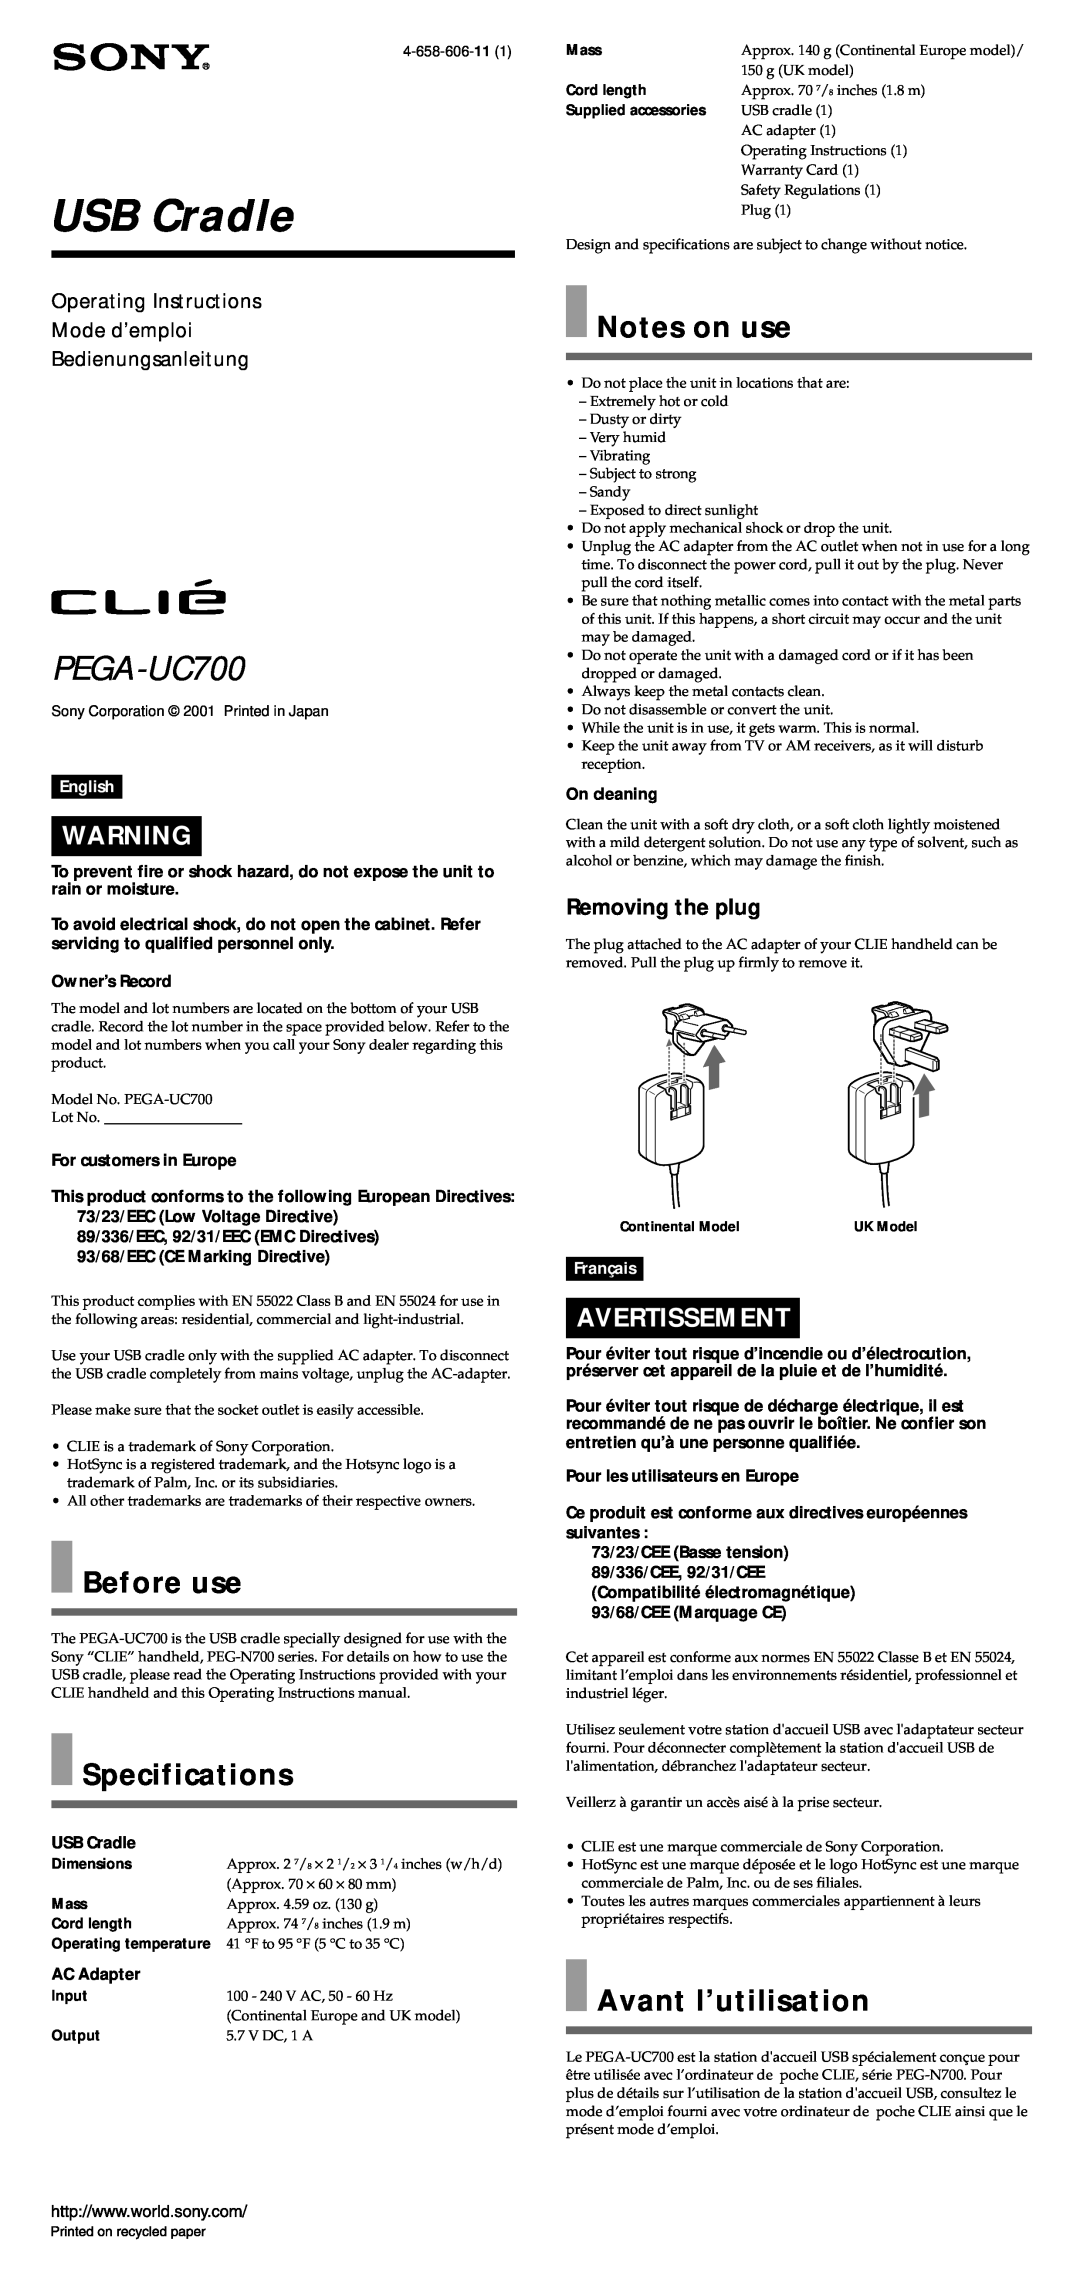 Sony PEGA-UC700 operating instructions Before use, Specifications, Notes on use, Avant l’utilisation, Avertissement 